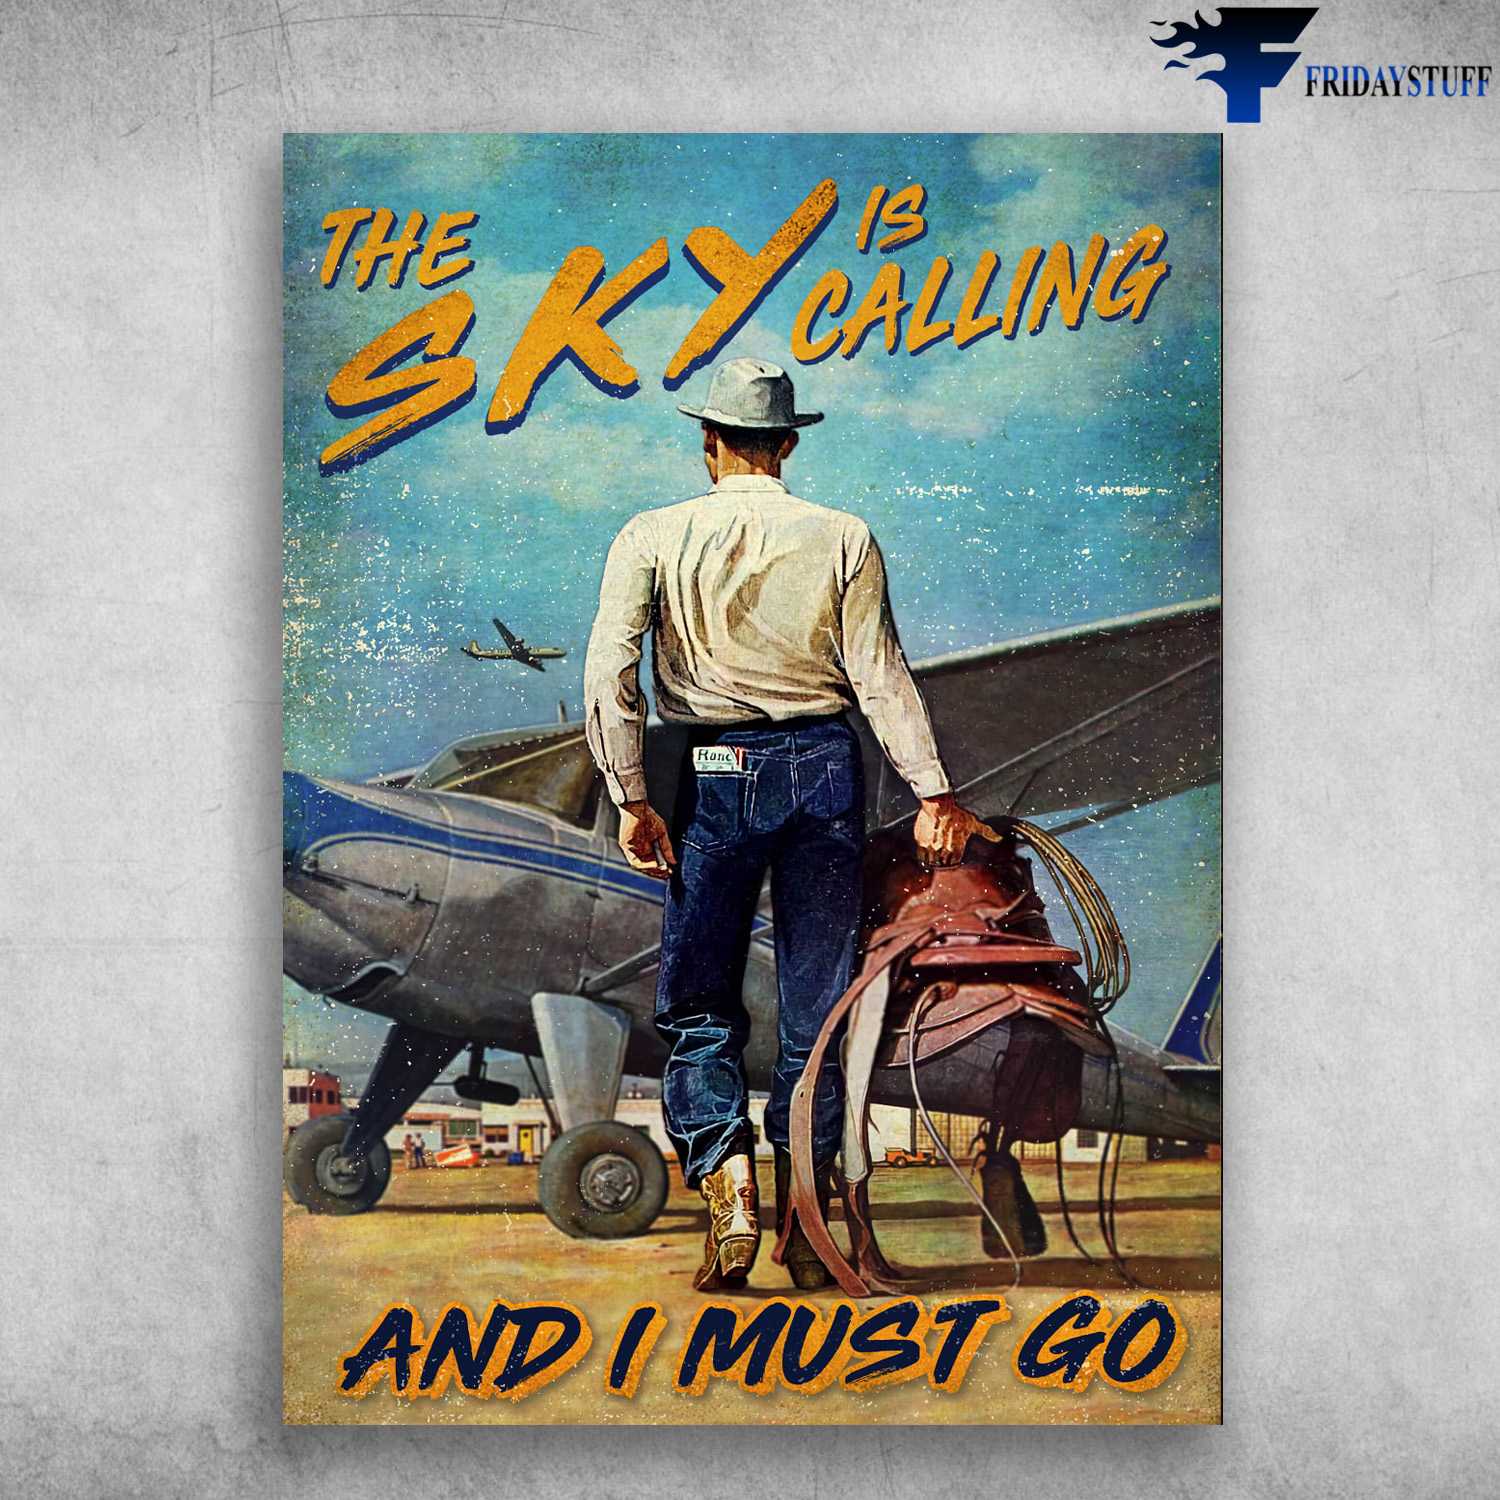 Cowboy Airplane, Cowboy Poster, Pilot Lover, The Sky Is Calling, And I Must Go